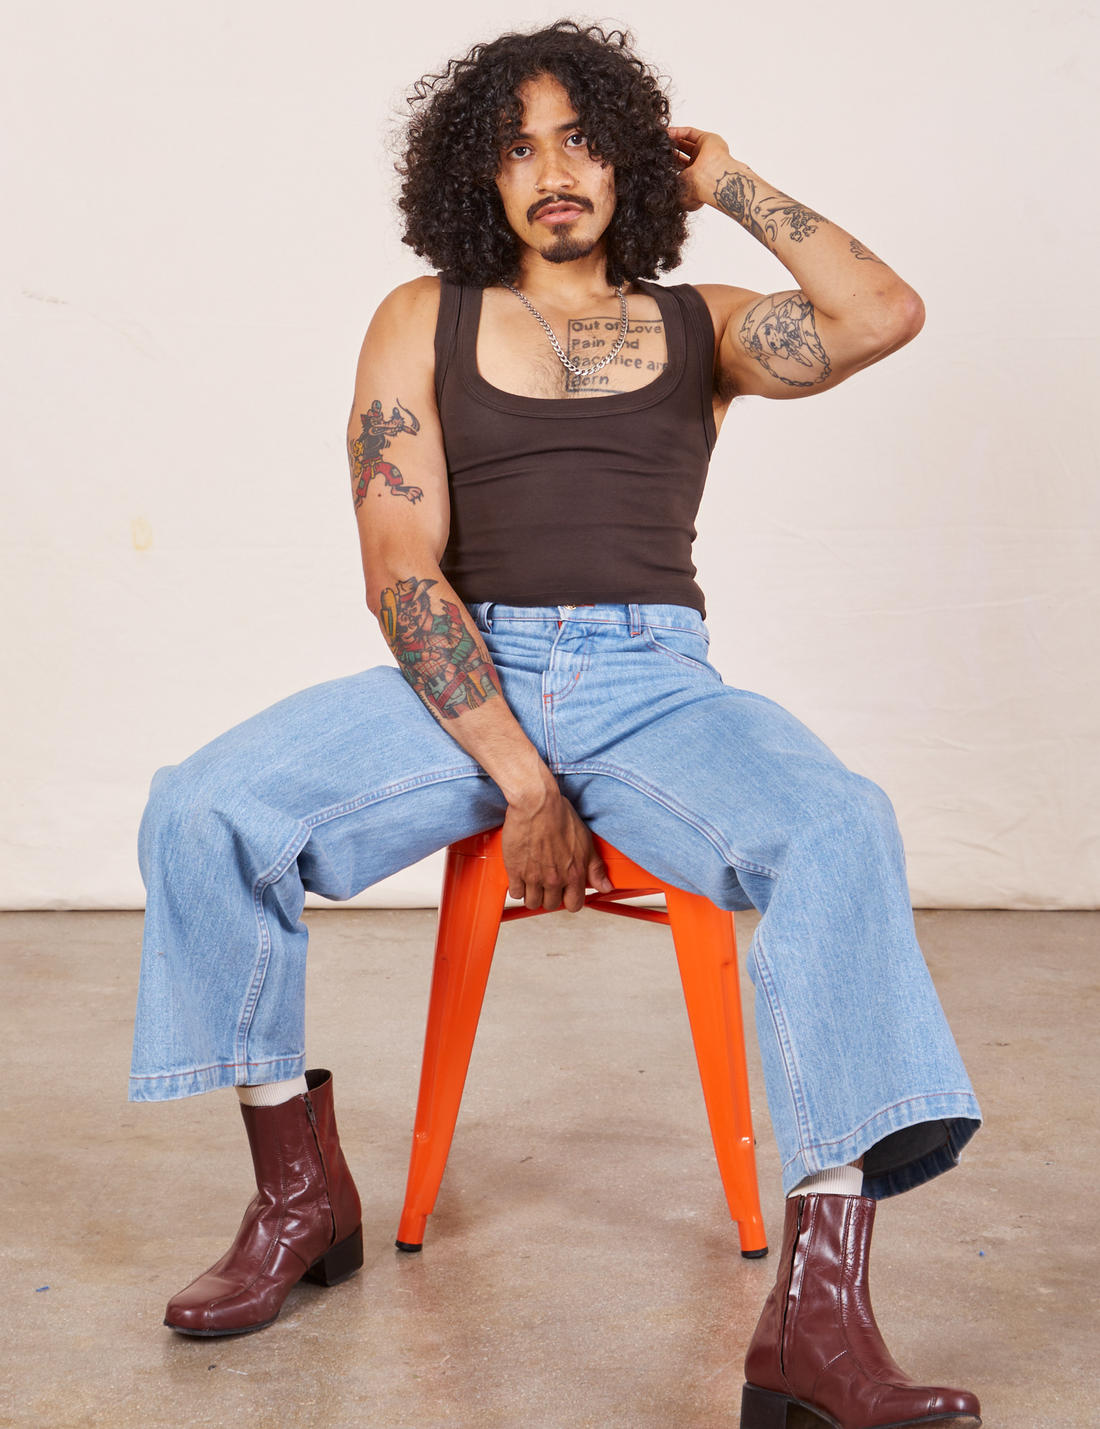 Jesse is wearing Cropped Tank Top in Espresso Brown and light wash Sailor Jeans sitting in an orange stool